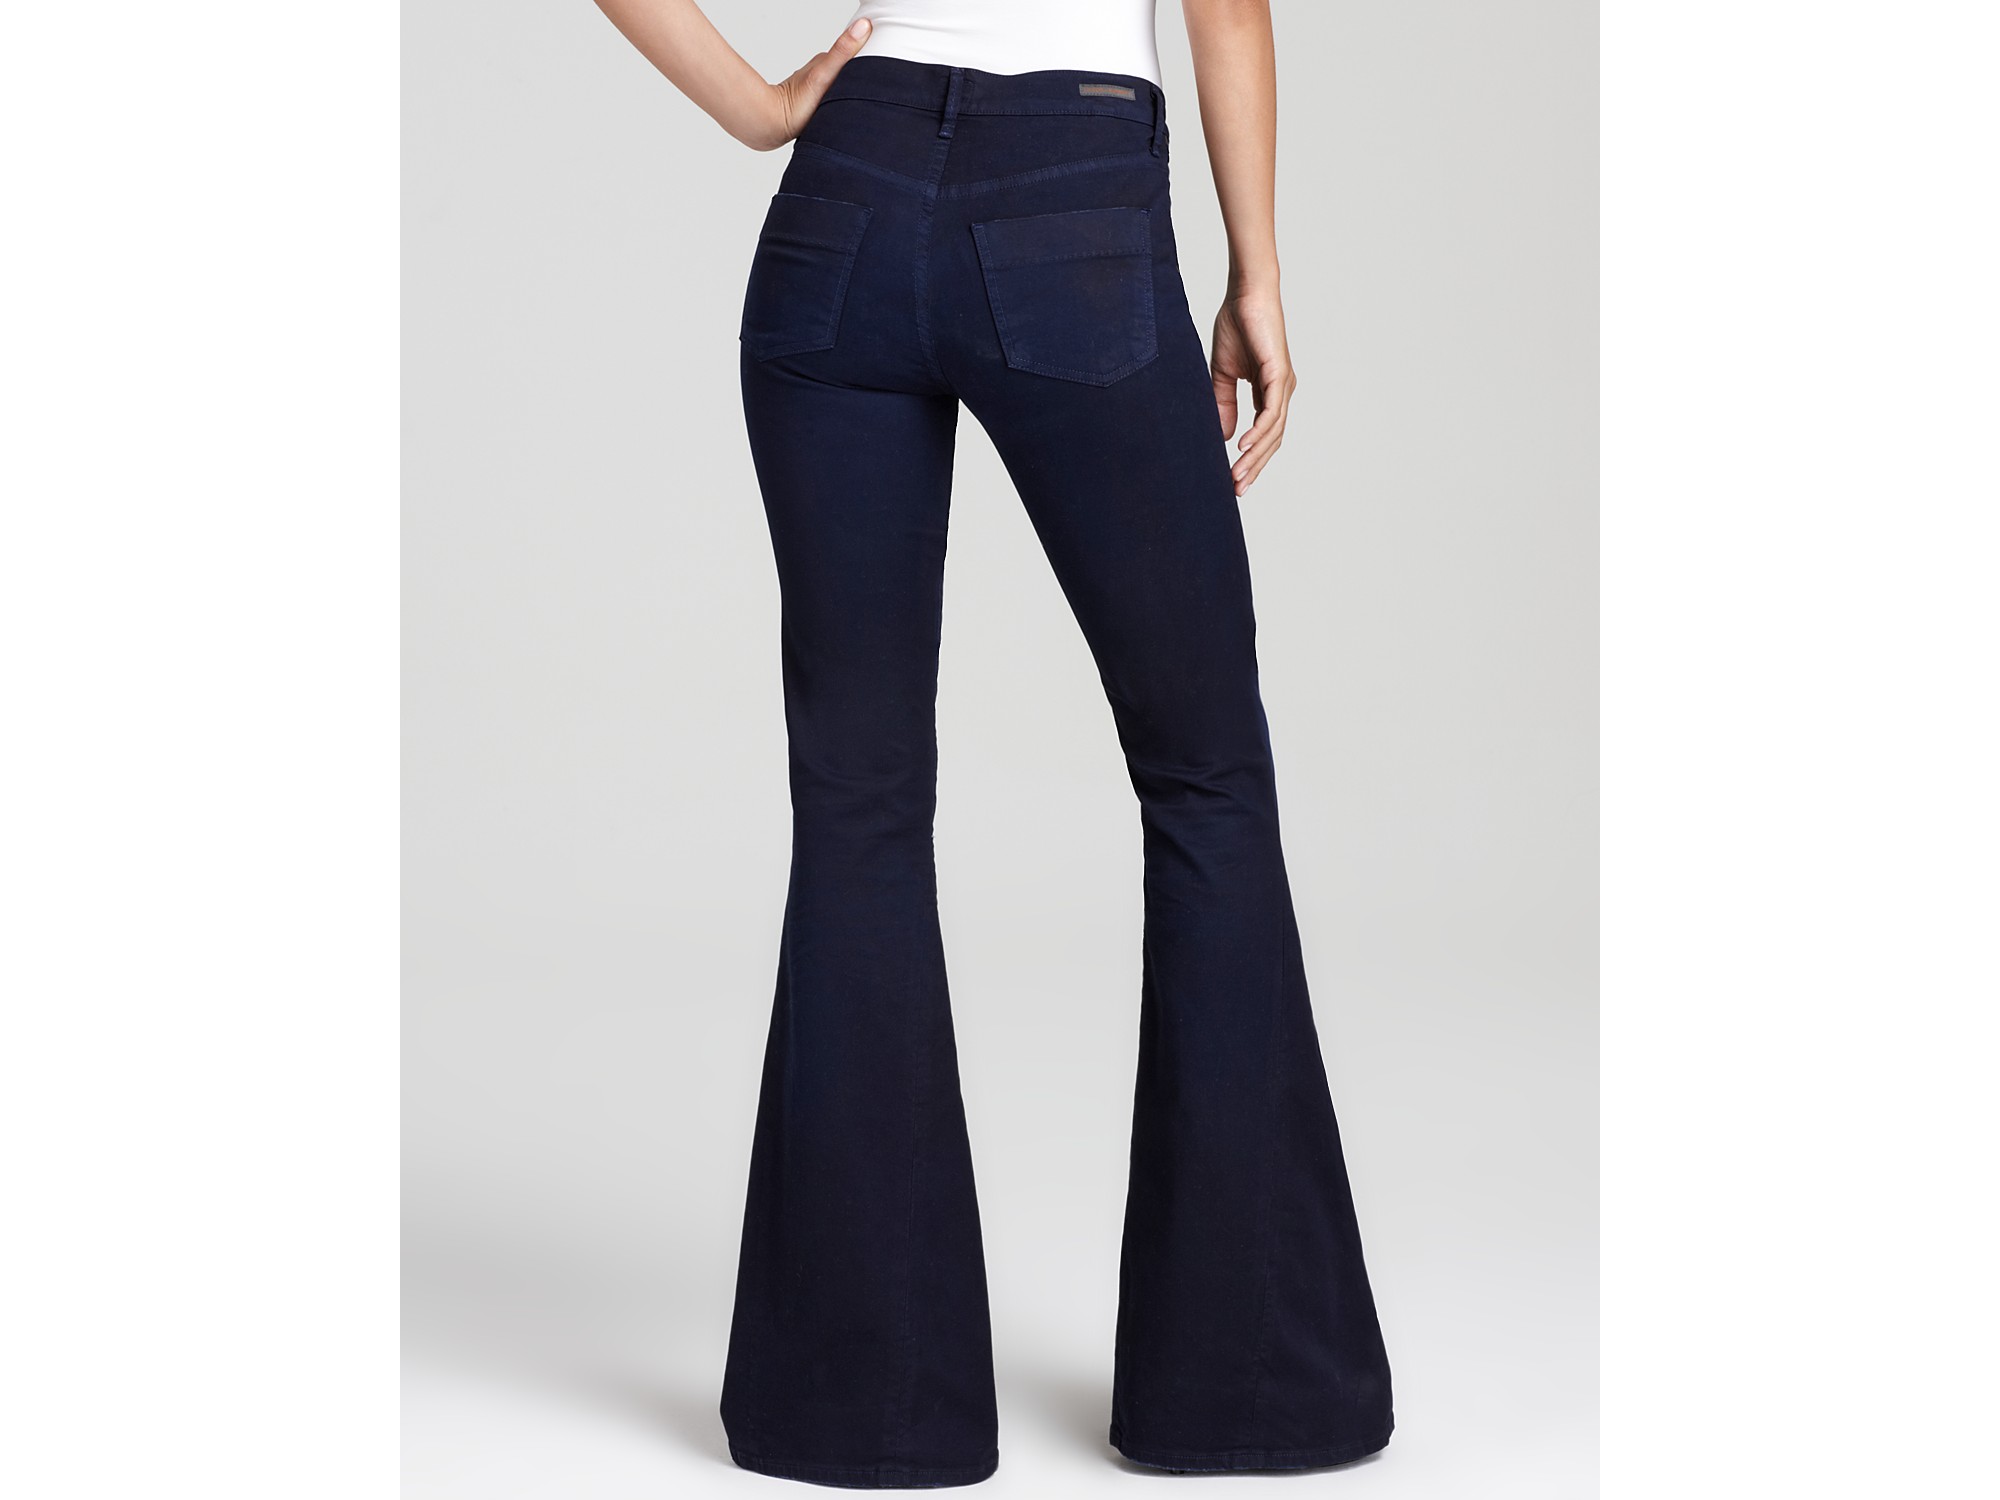 Lyst - Ash Citizens Of Humanity Angie Super-flare Jeans in Midnight ...